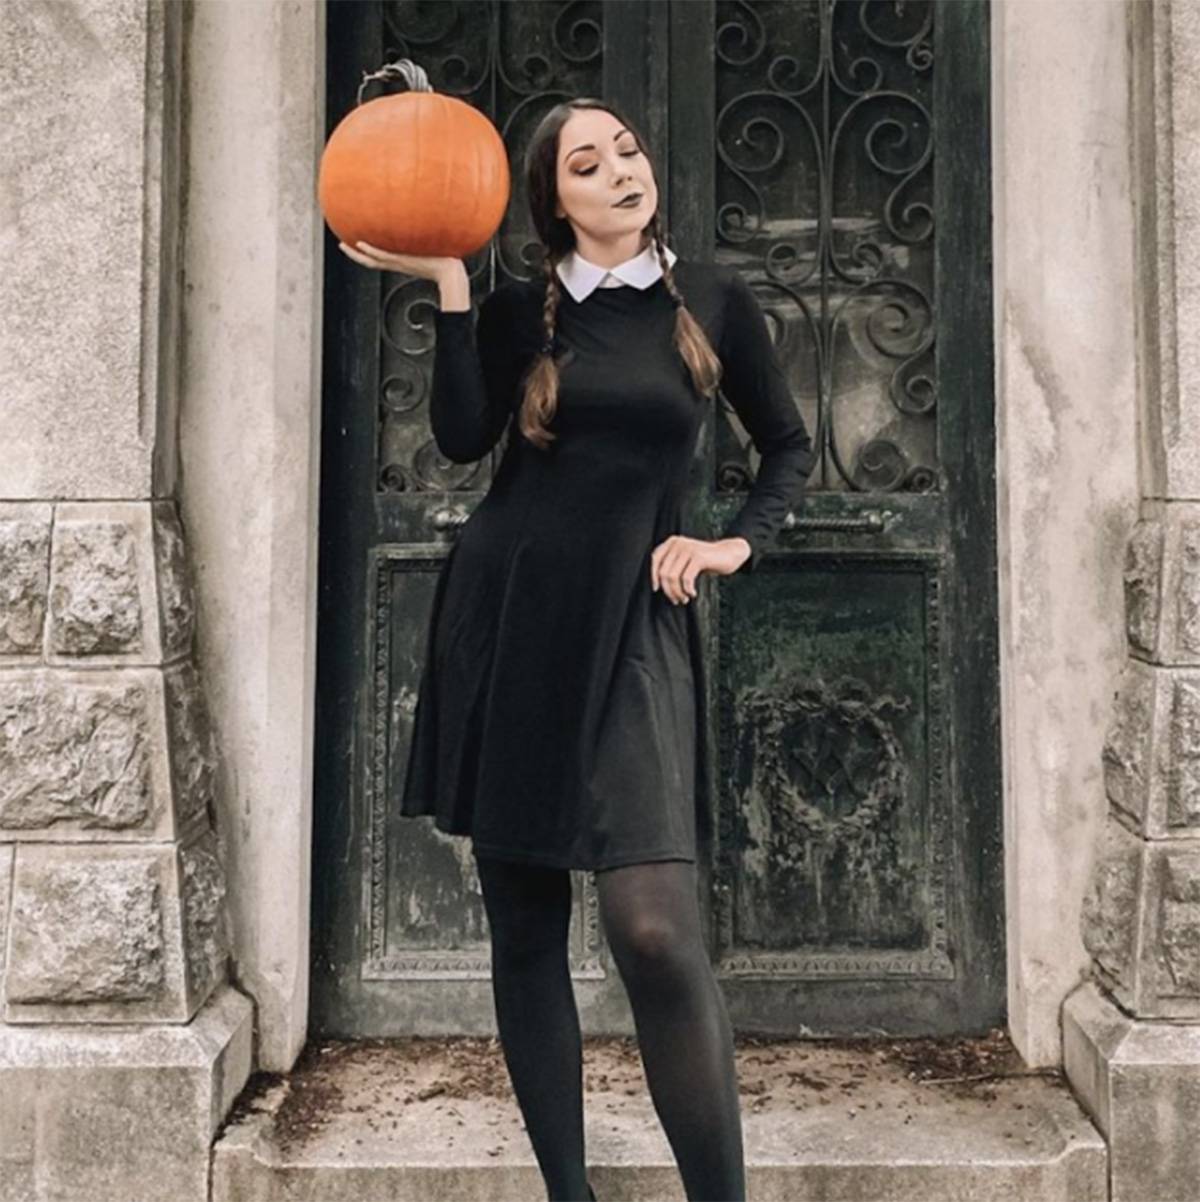 Addams Family Costume Ideas for Your Next Halloween - Curbly